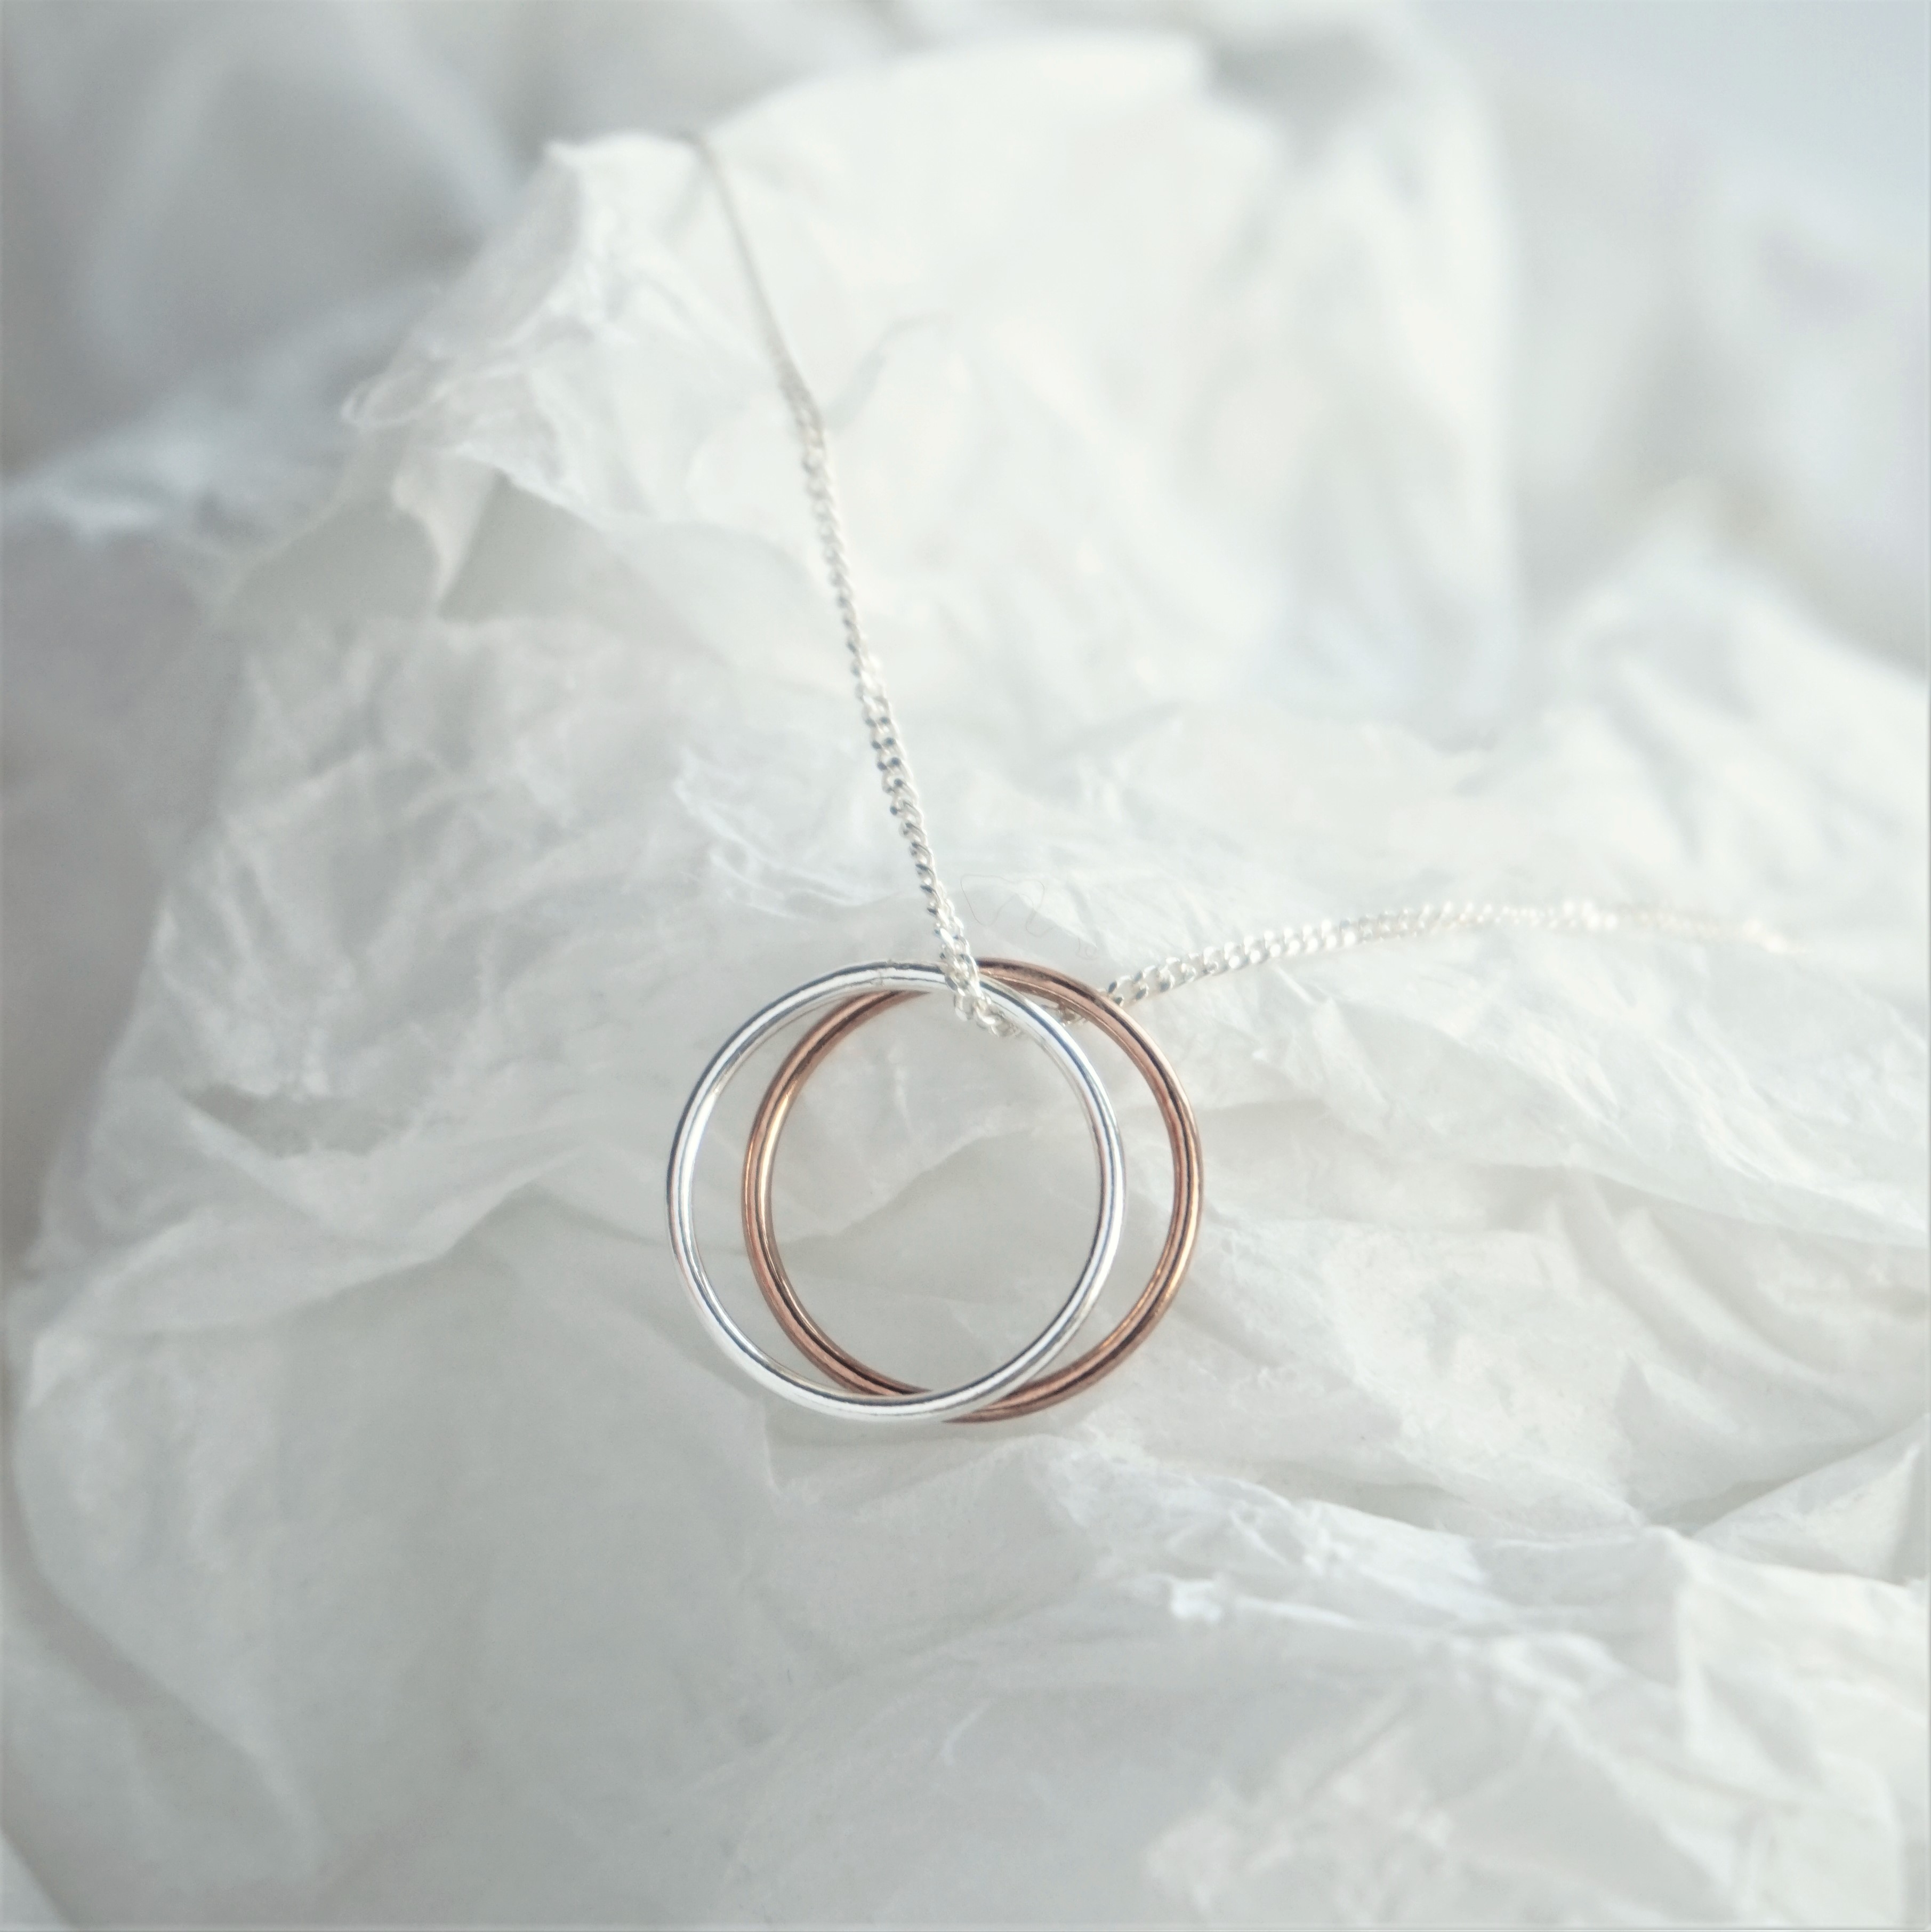 sterling silver and rose gold eternity rings necklace